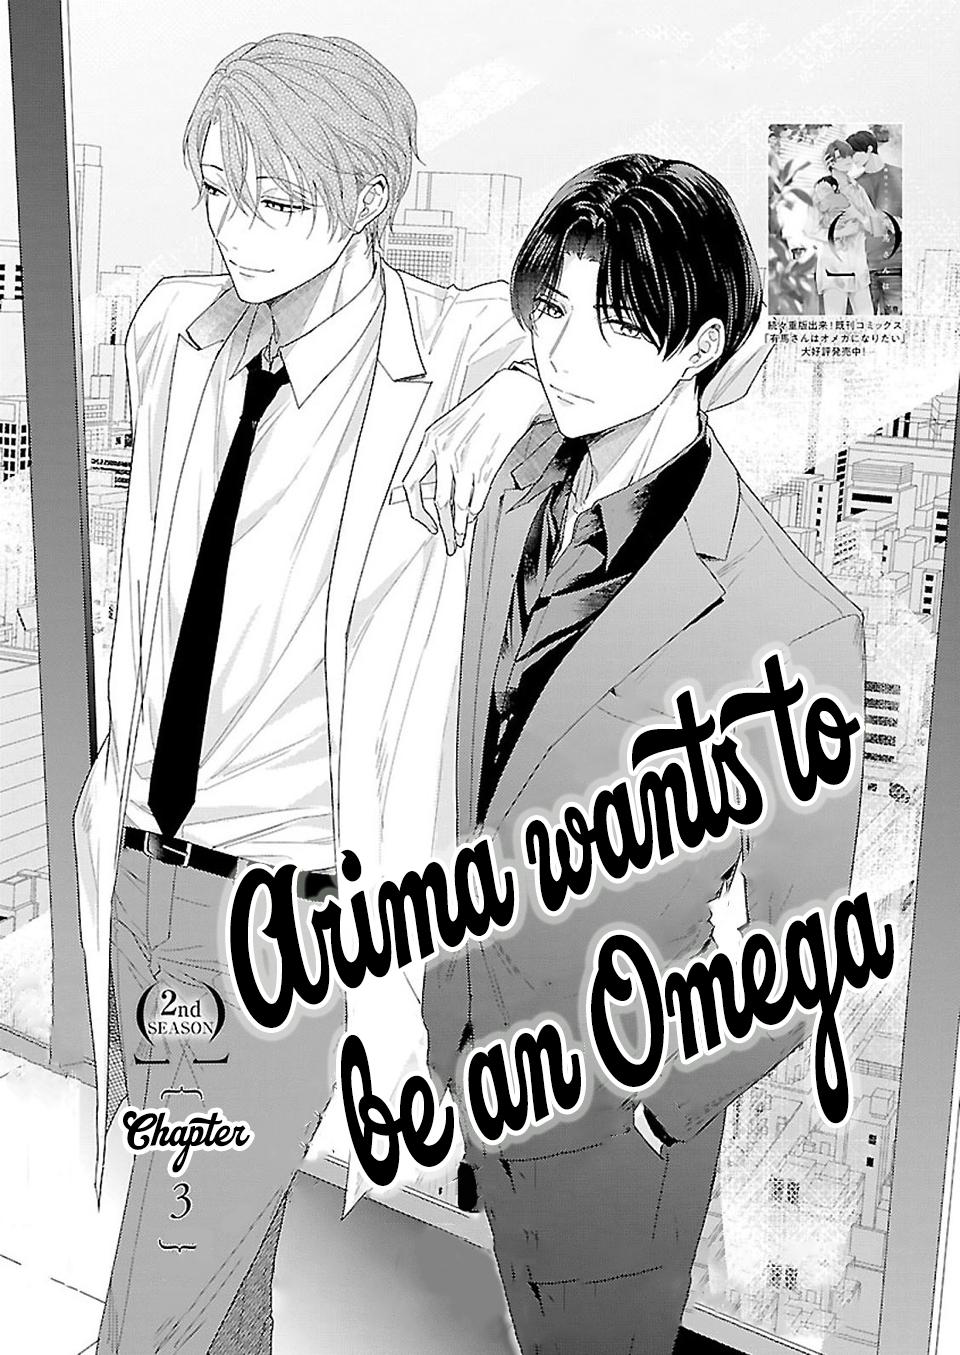 Arima Wants To Be An Omega - Page 2